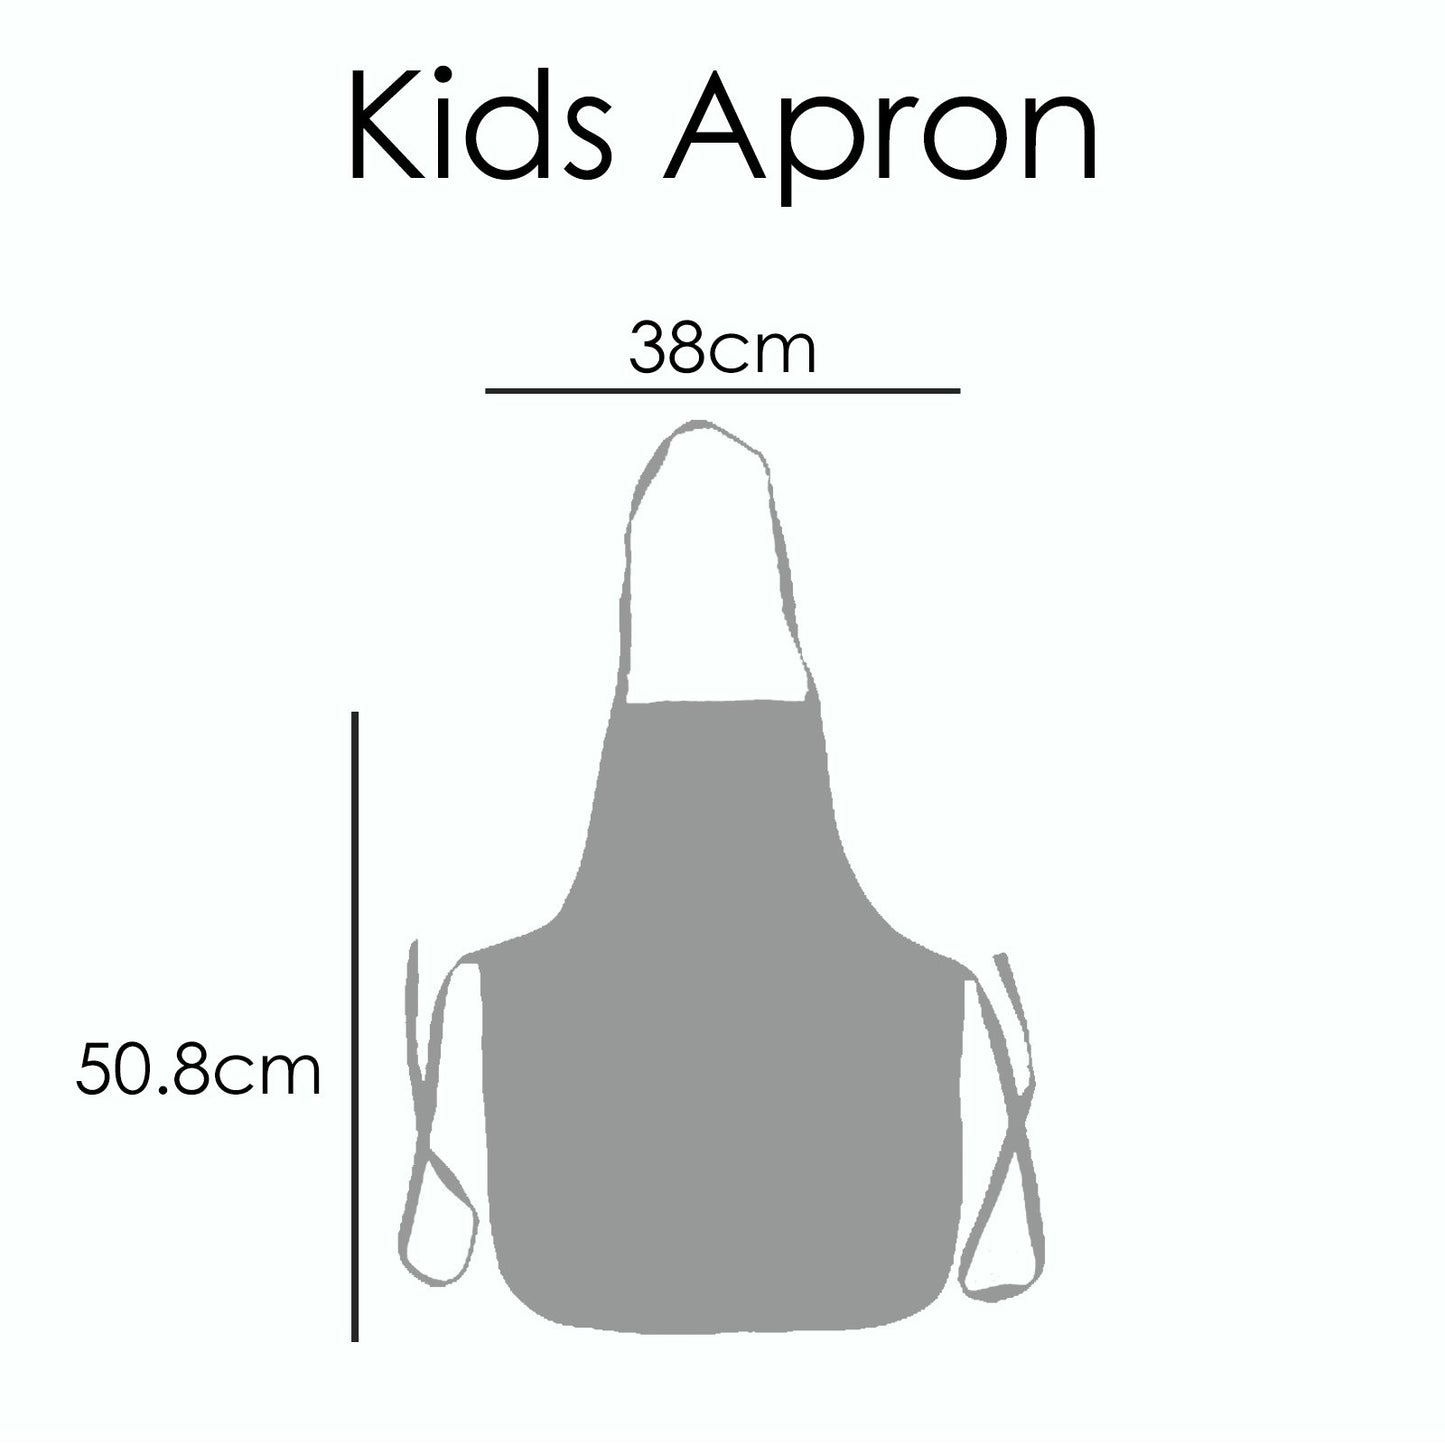 Personalised Apron with Welcoming Text and Climbing Mum and Baby Koalas